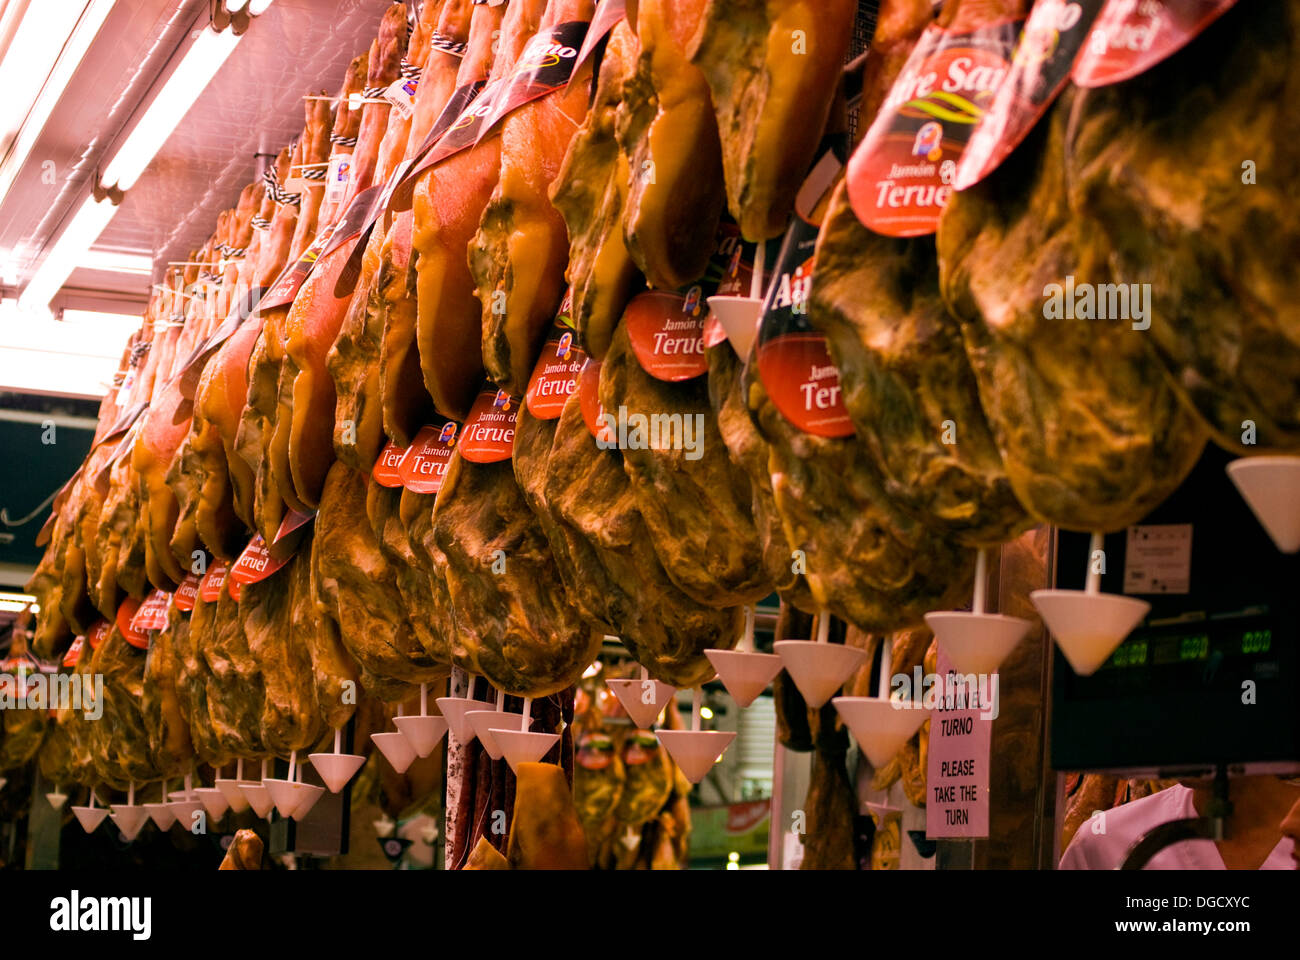 The Central Market located at the Plaza del Mercado, ham stall at Central Market Stock Photo